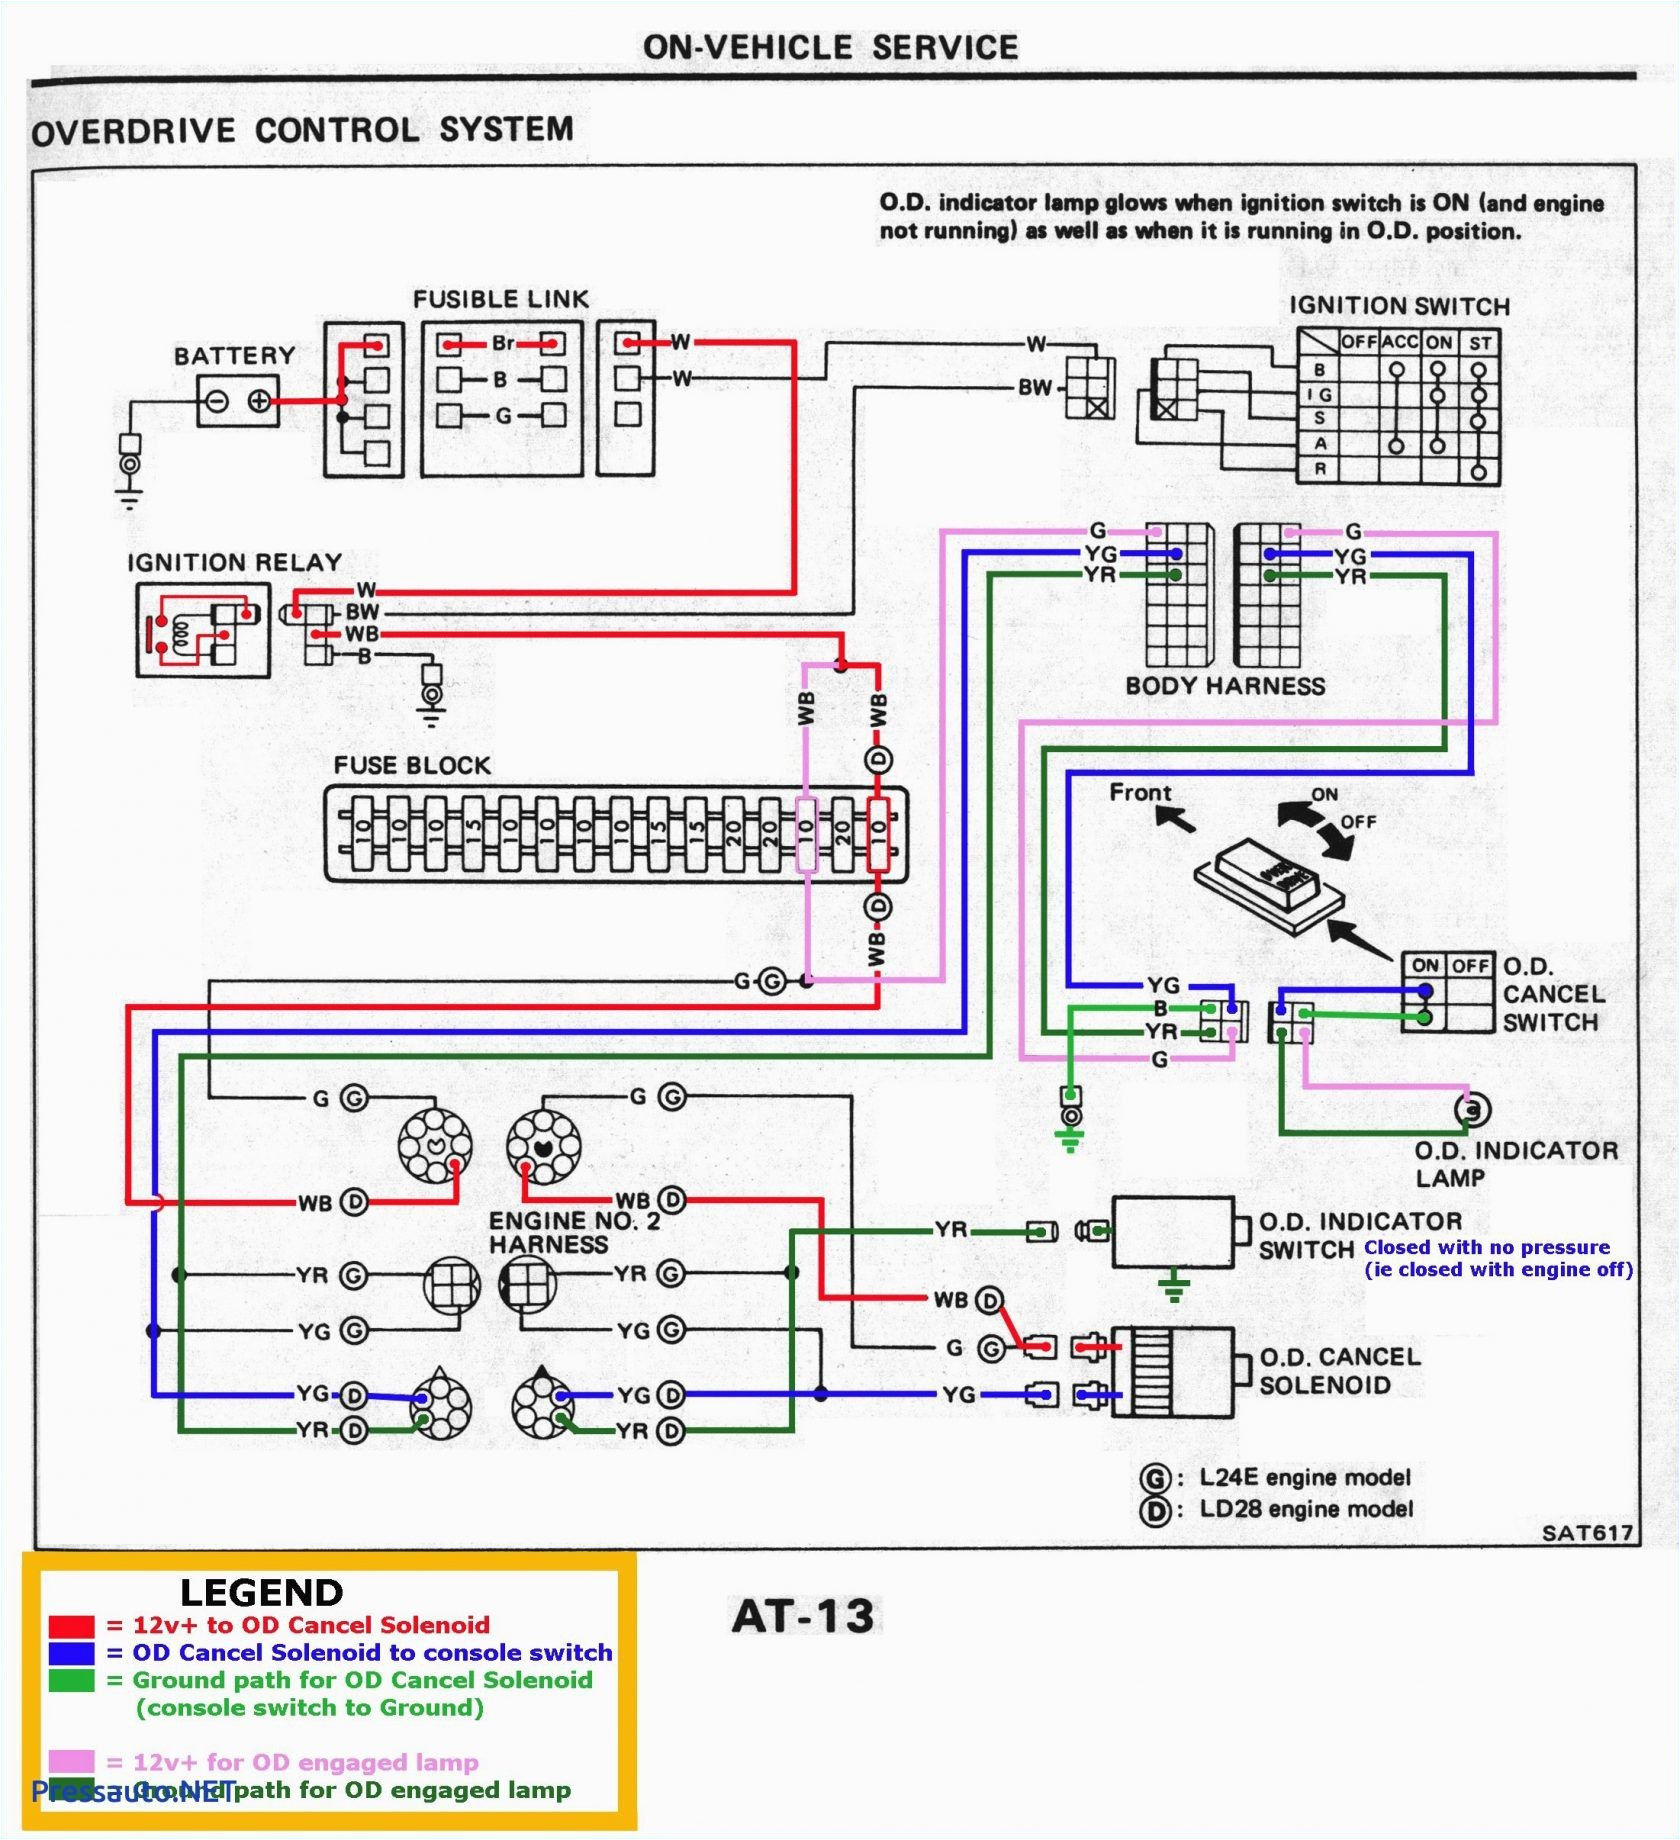 1996 honda accord trailer wiring connection diagram wiring diagram hospital bed remote control wiring diagrams